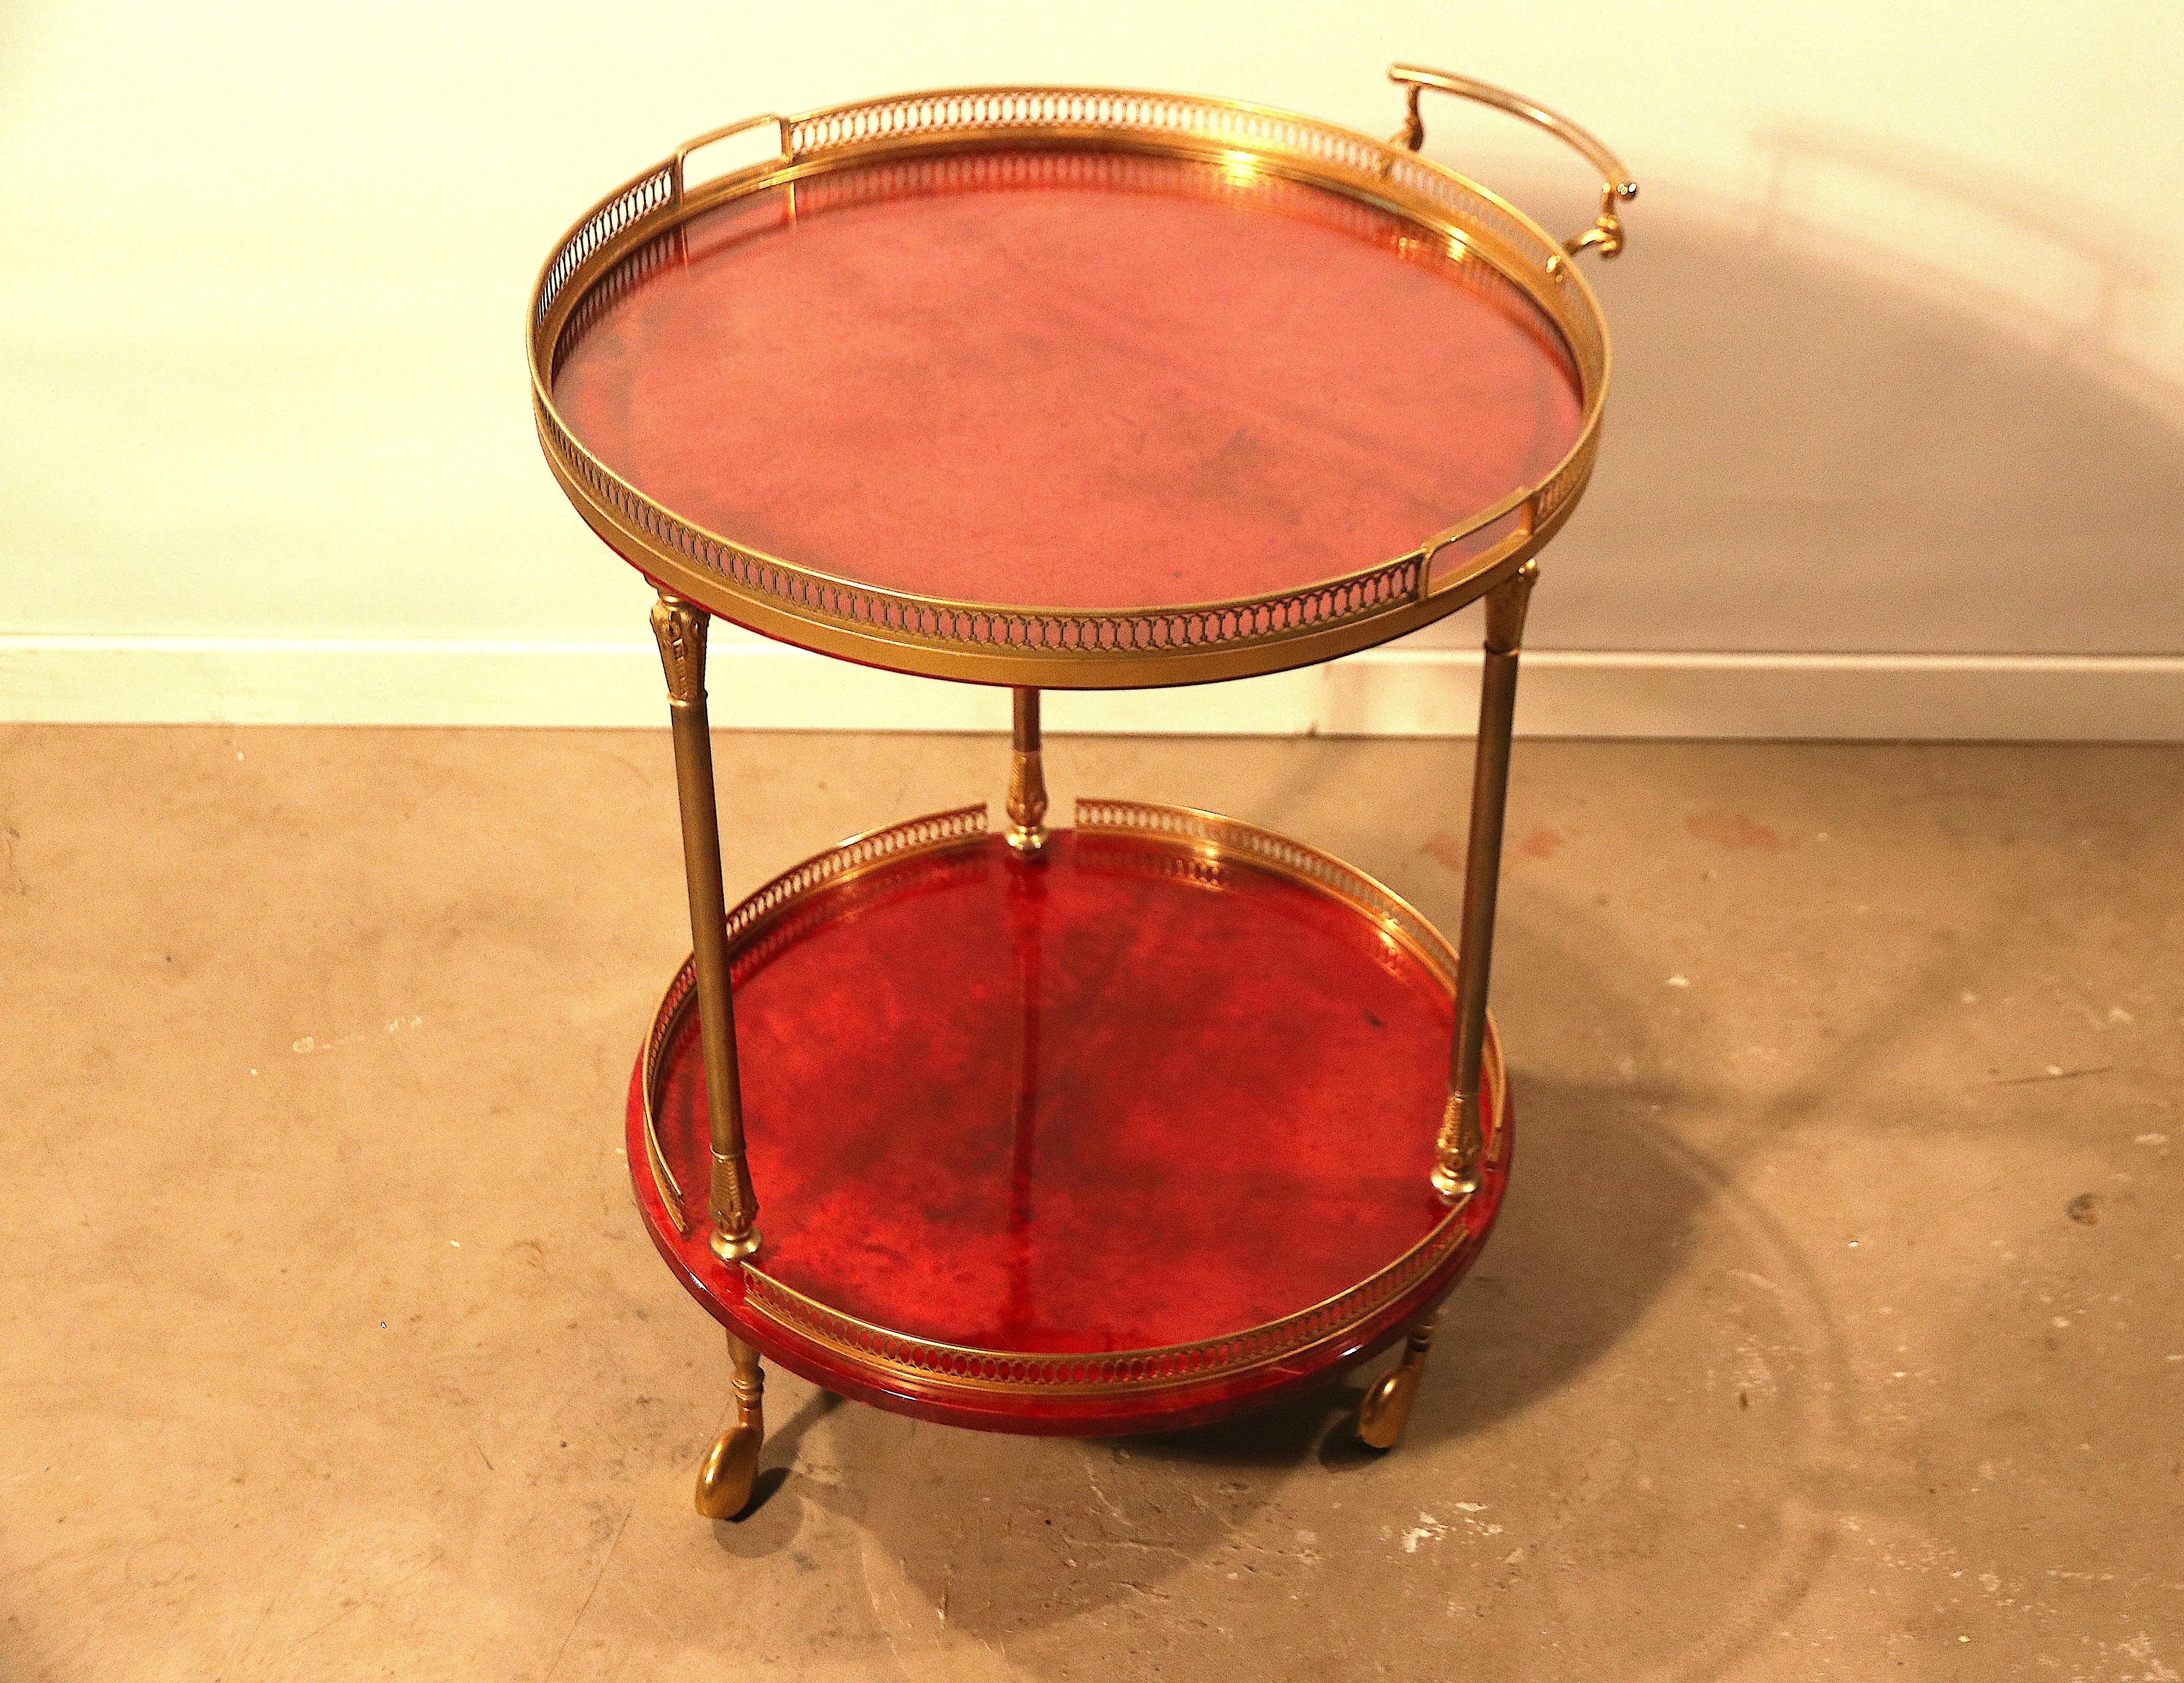 Astonishing piece designed and signed by Aldo Tura in vivid-red dyed goatskin leather or parchment. This is a 2-tier bar cart or tea / serving drinks trolley on 3 beautifully covered typically 1950s streamline brass casters. The top tray is a